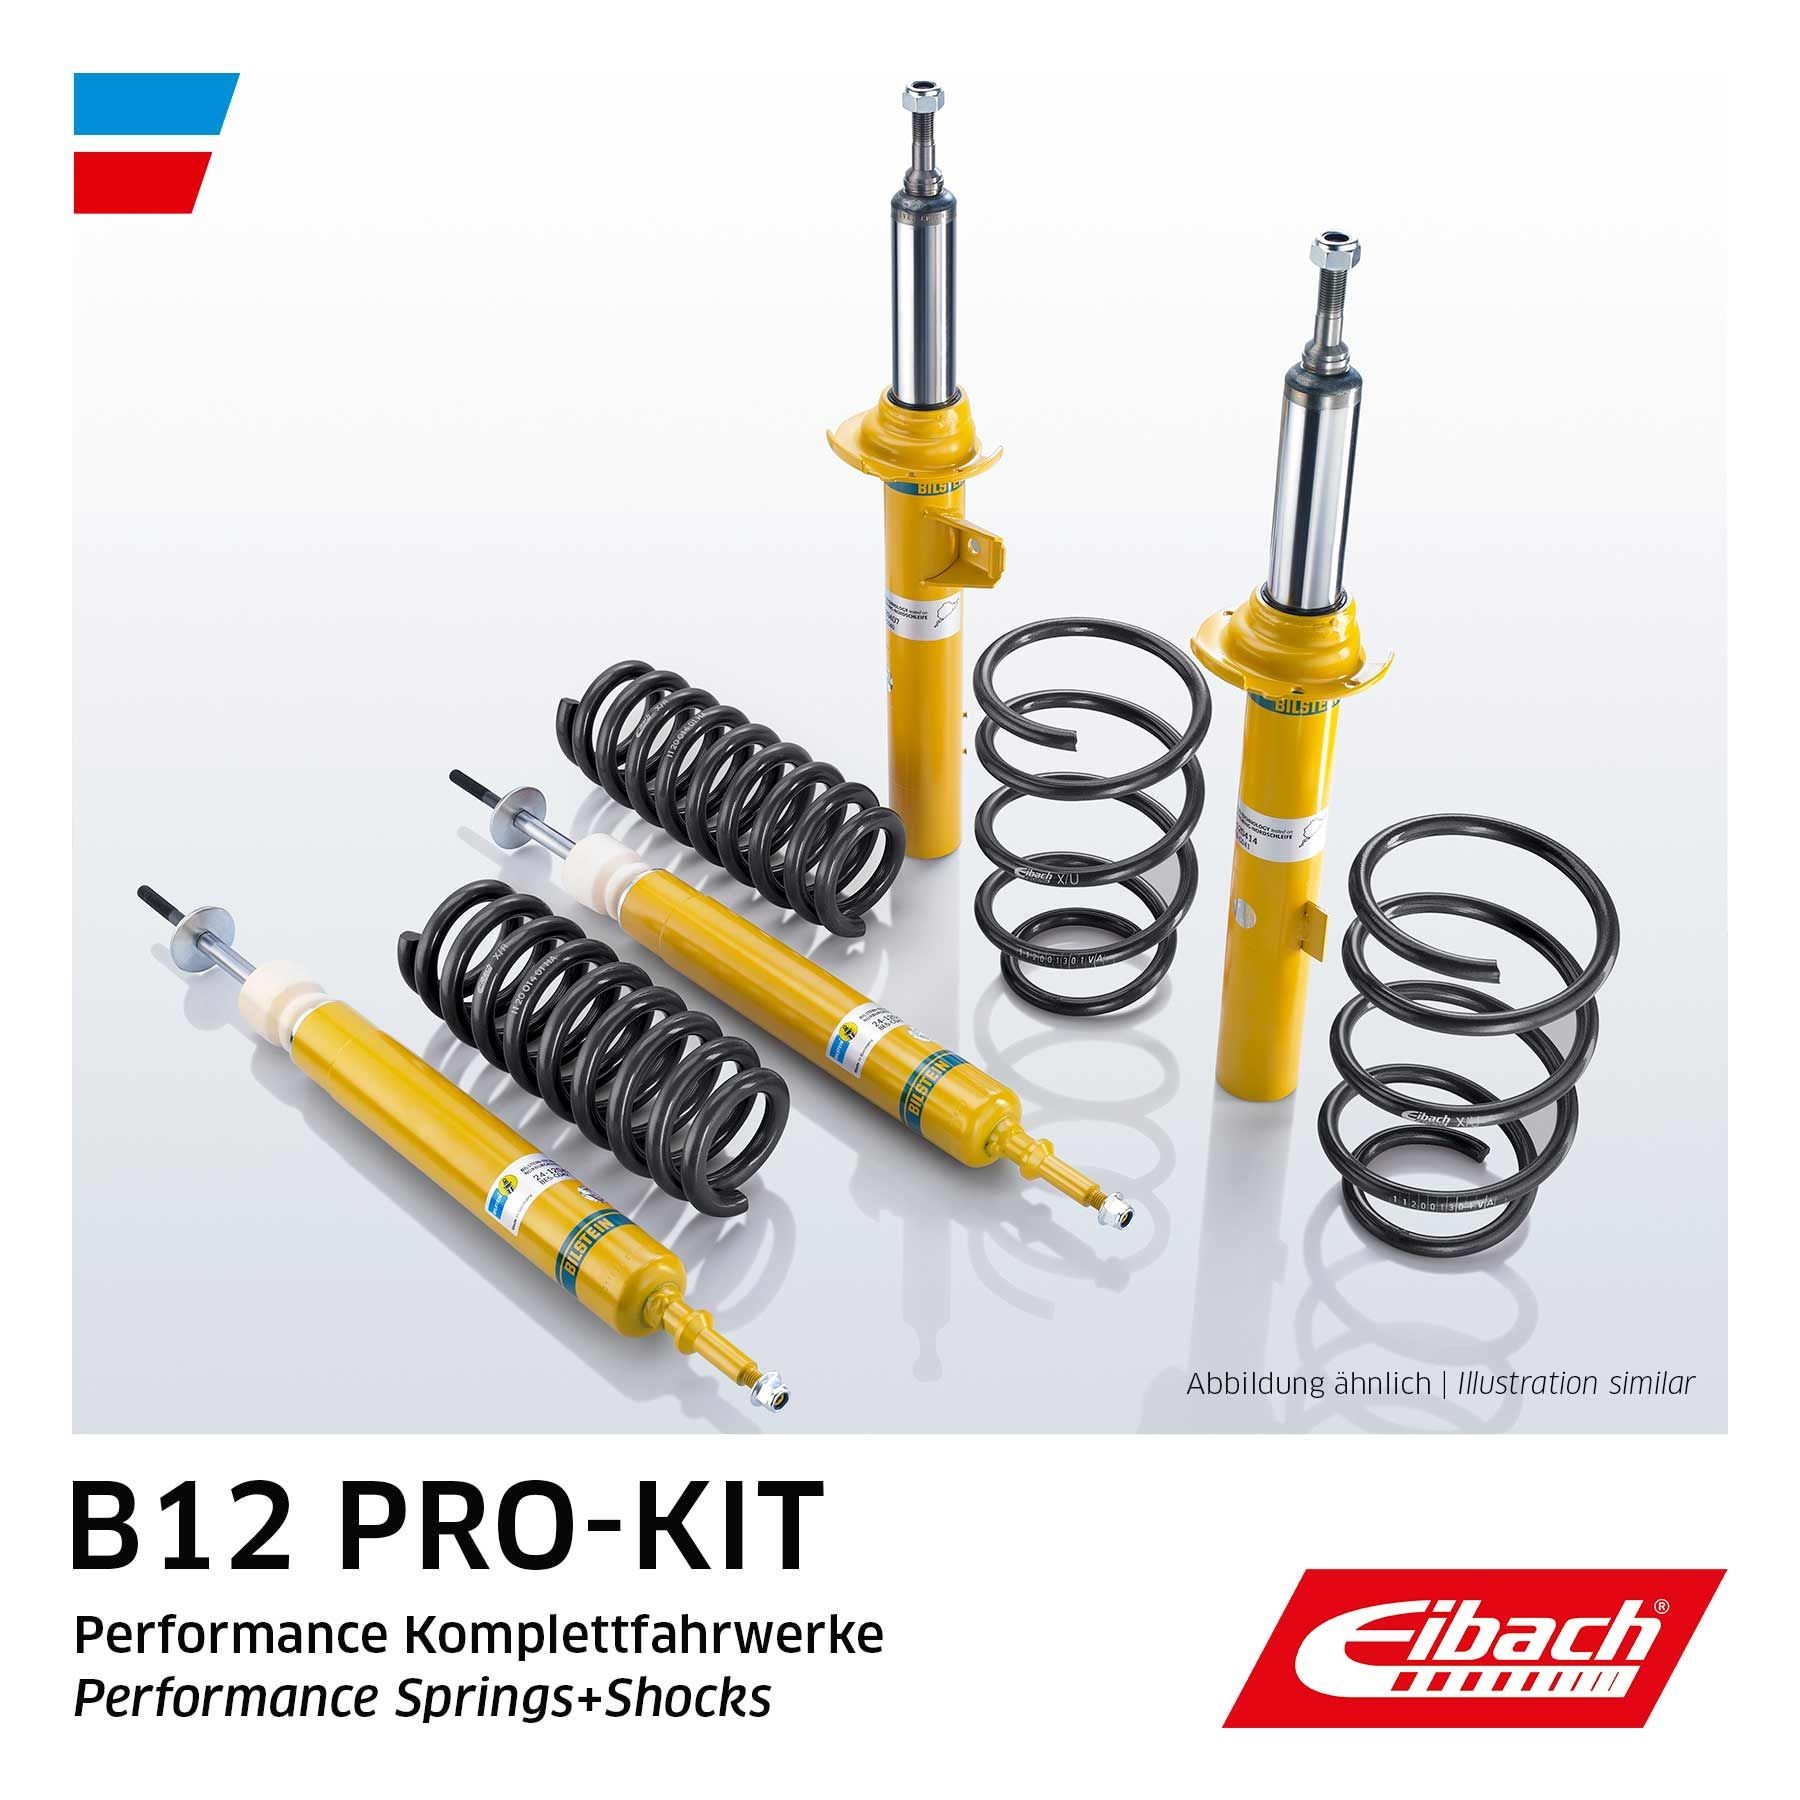 EIBACH Suspension kit, coil springs / shock absorbers VW Golf VI Convertible (517) new E90-85-022-05-22